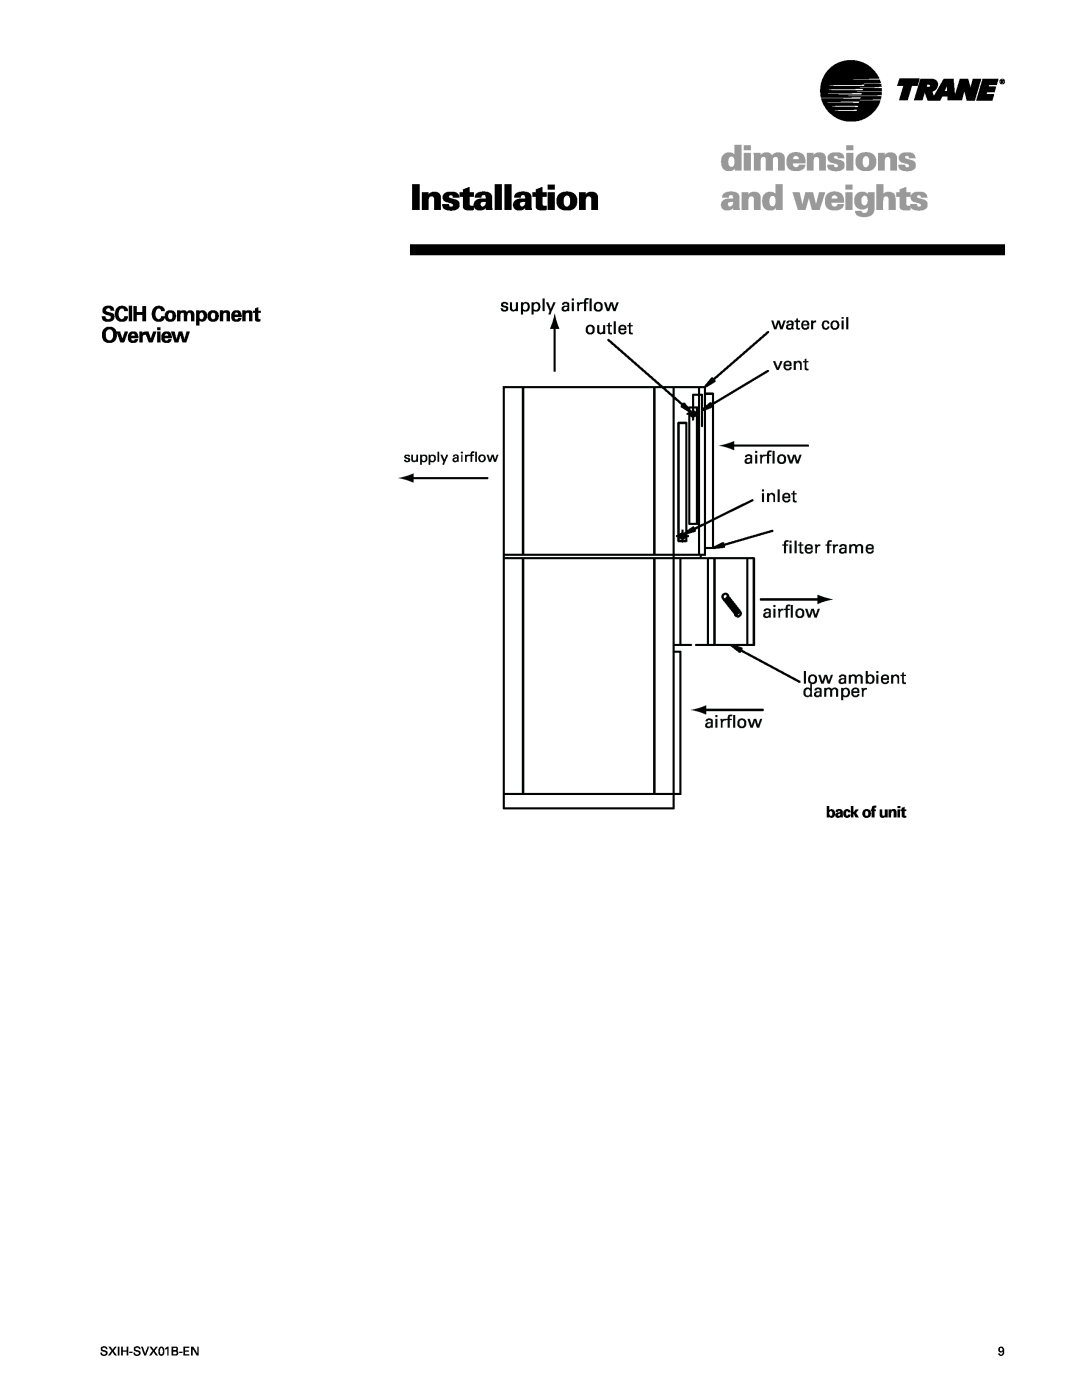 Trane manual Installation, dimensions, and weights, SCIH Component Overview, supply airflow, outlet, water coil, vent 